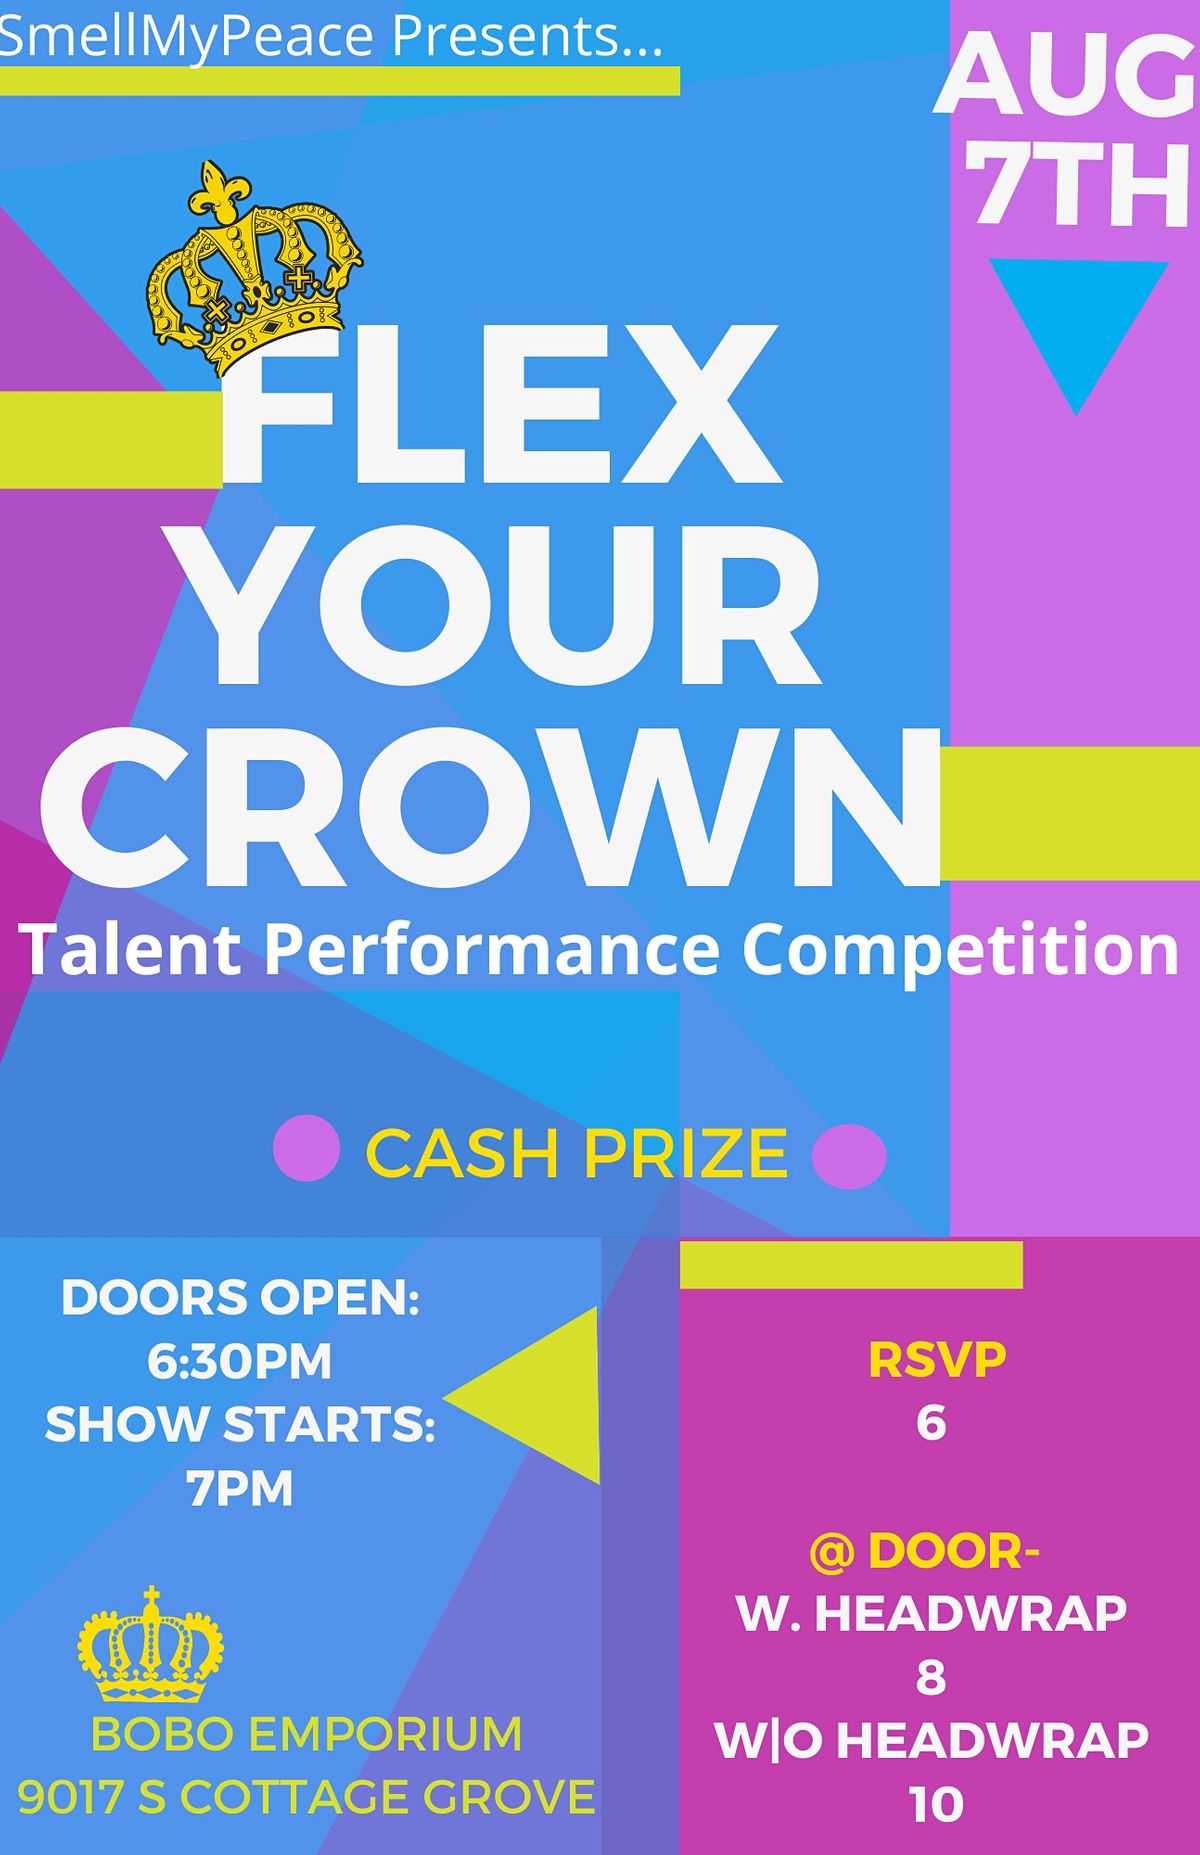 FLEX YOUR CROWN Performance Competition